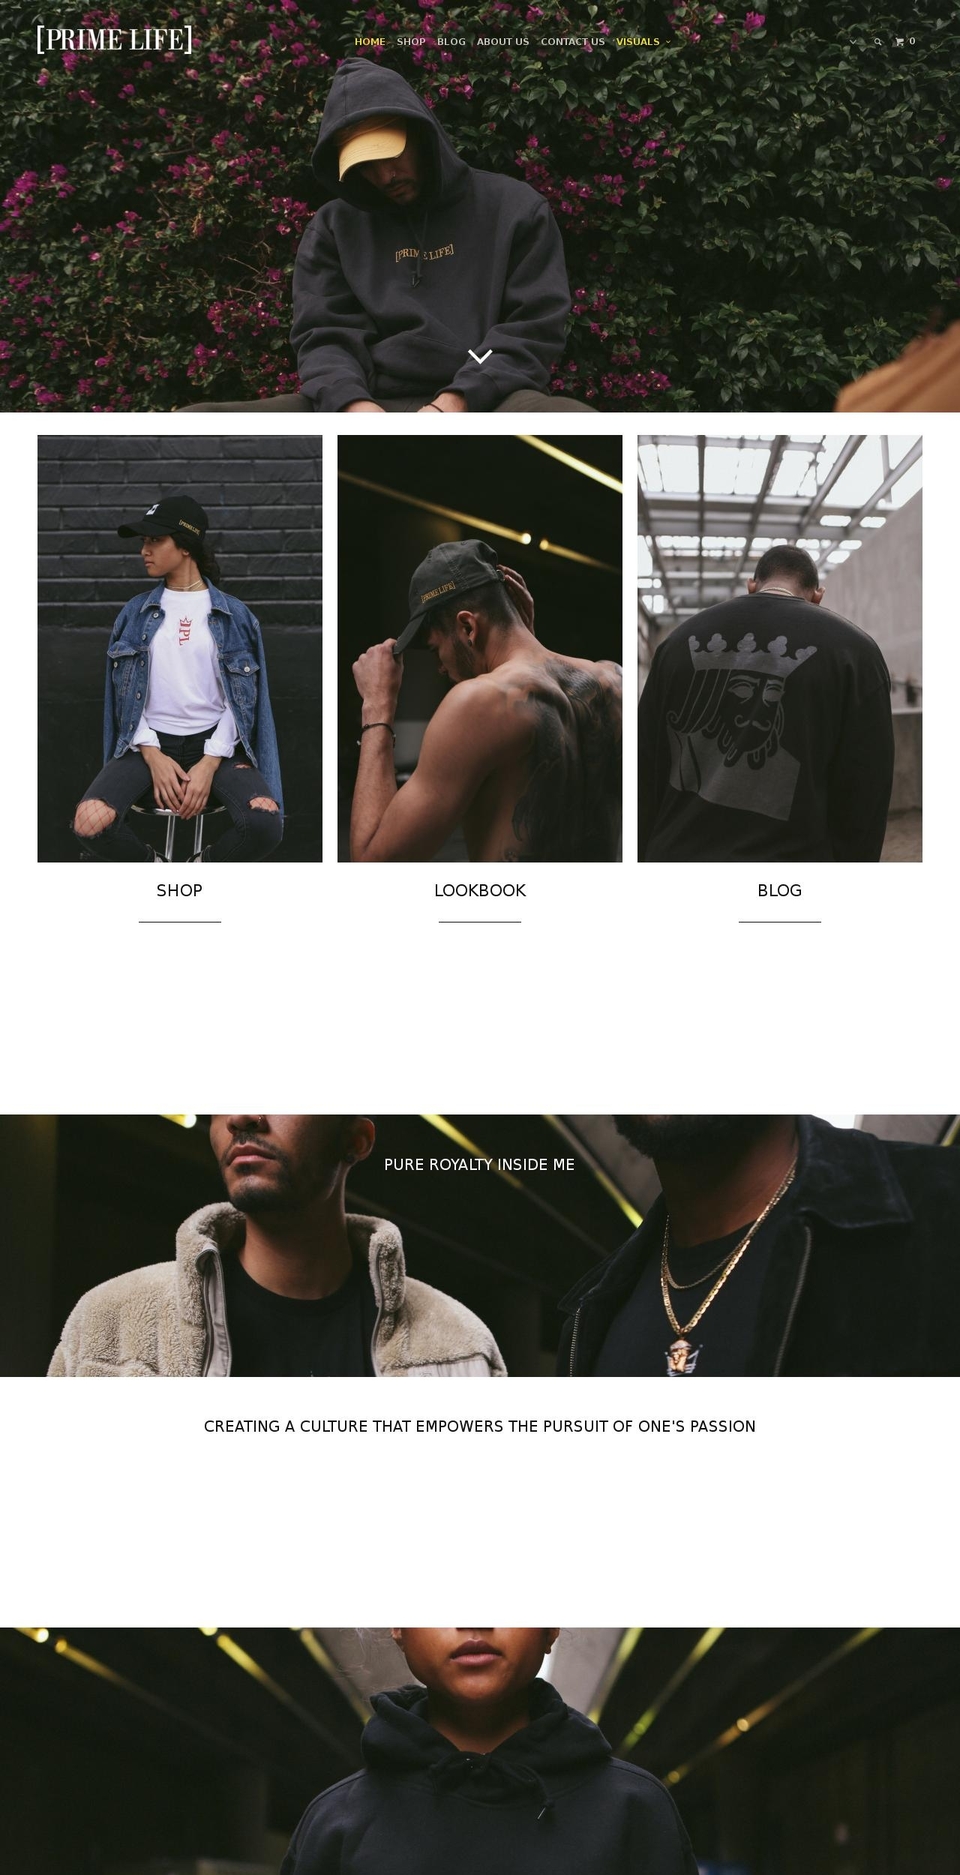 Spark Shopify theme site example primelifeclothing.com